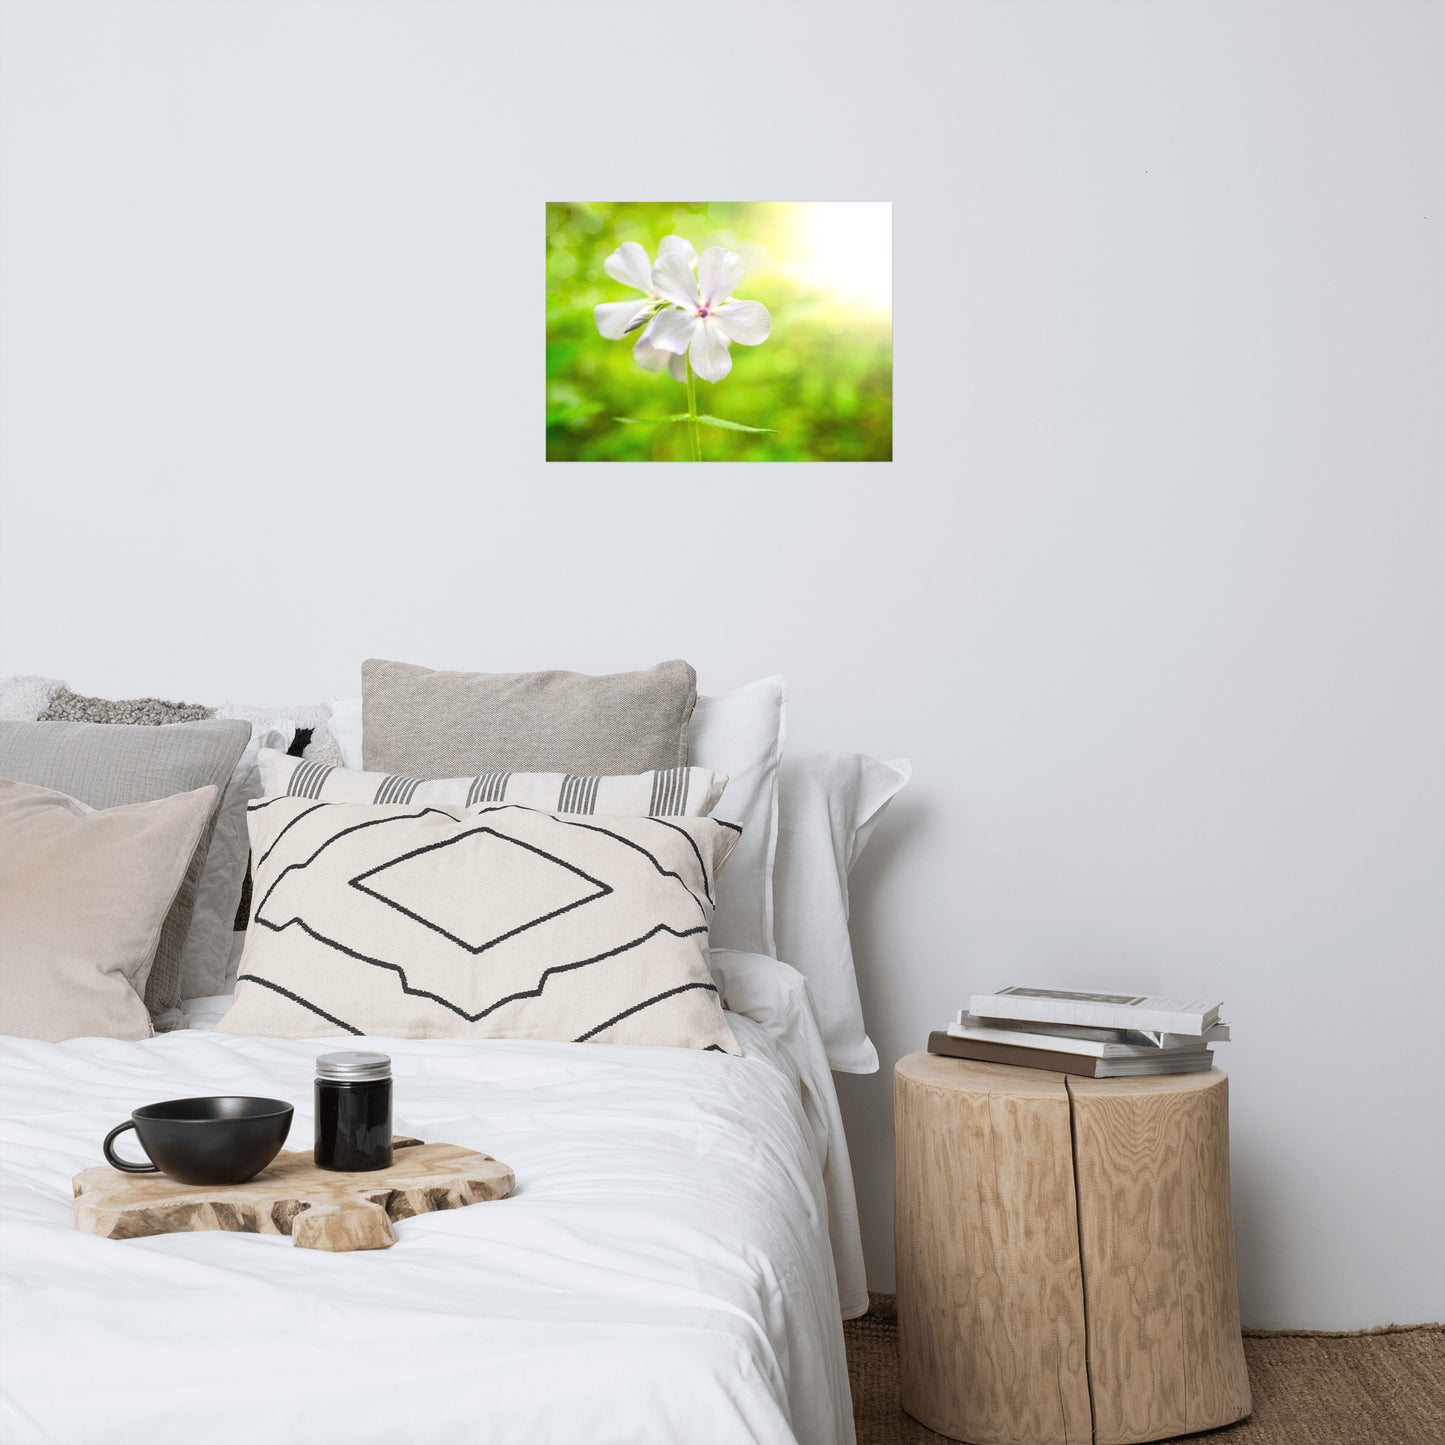 Beauty of the Forest Floor Floral Nature Photo Loose Unframed Wall Art Prints